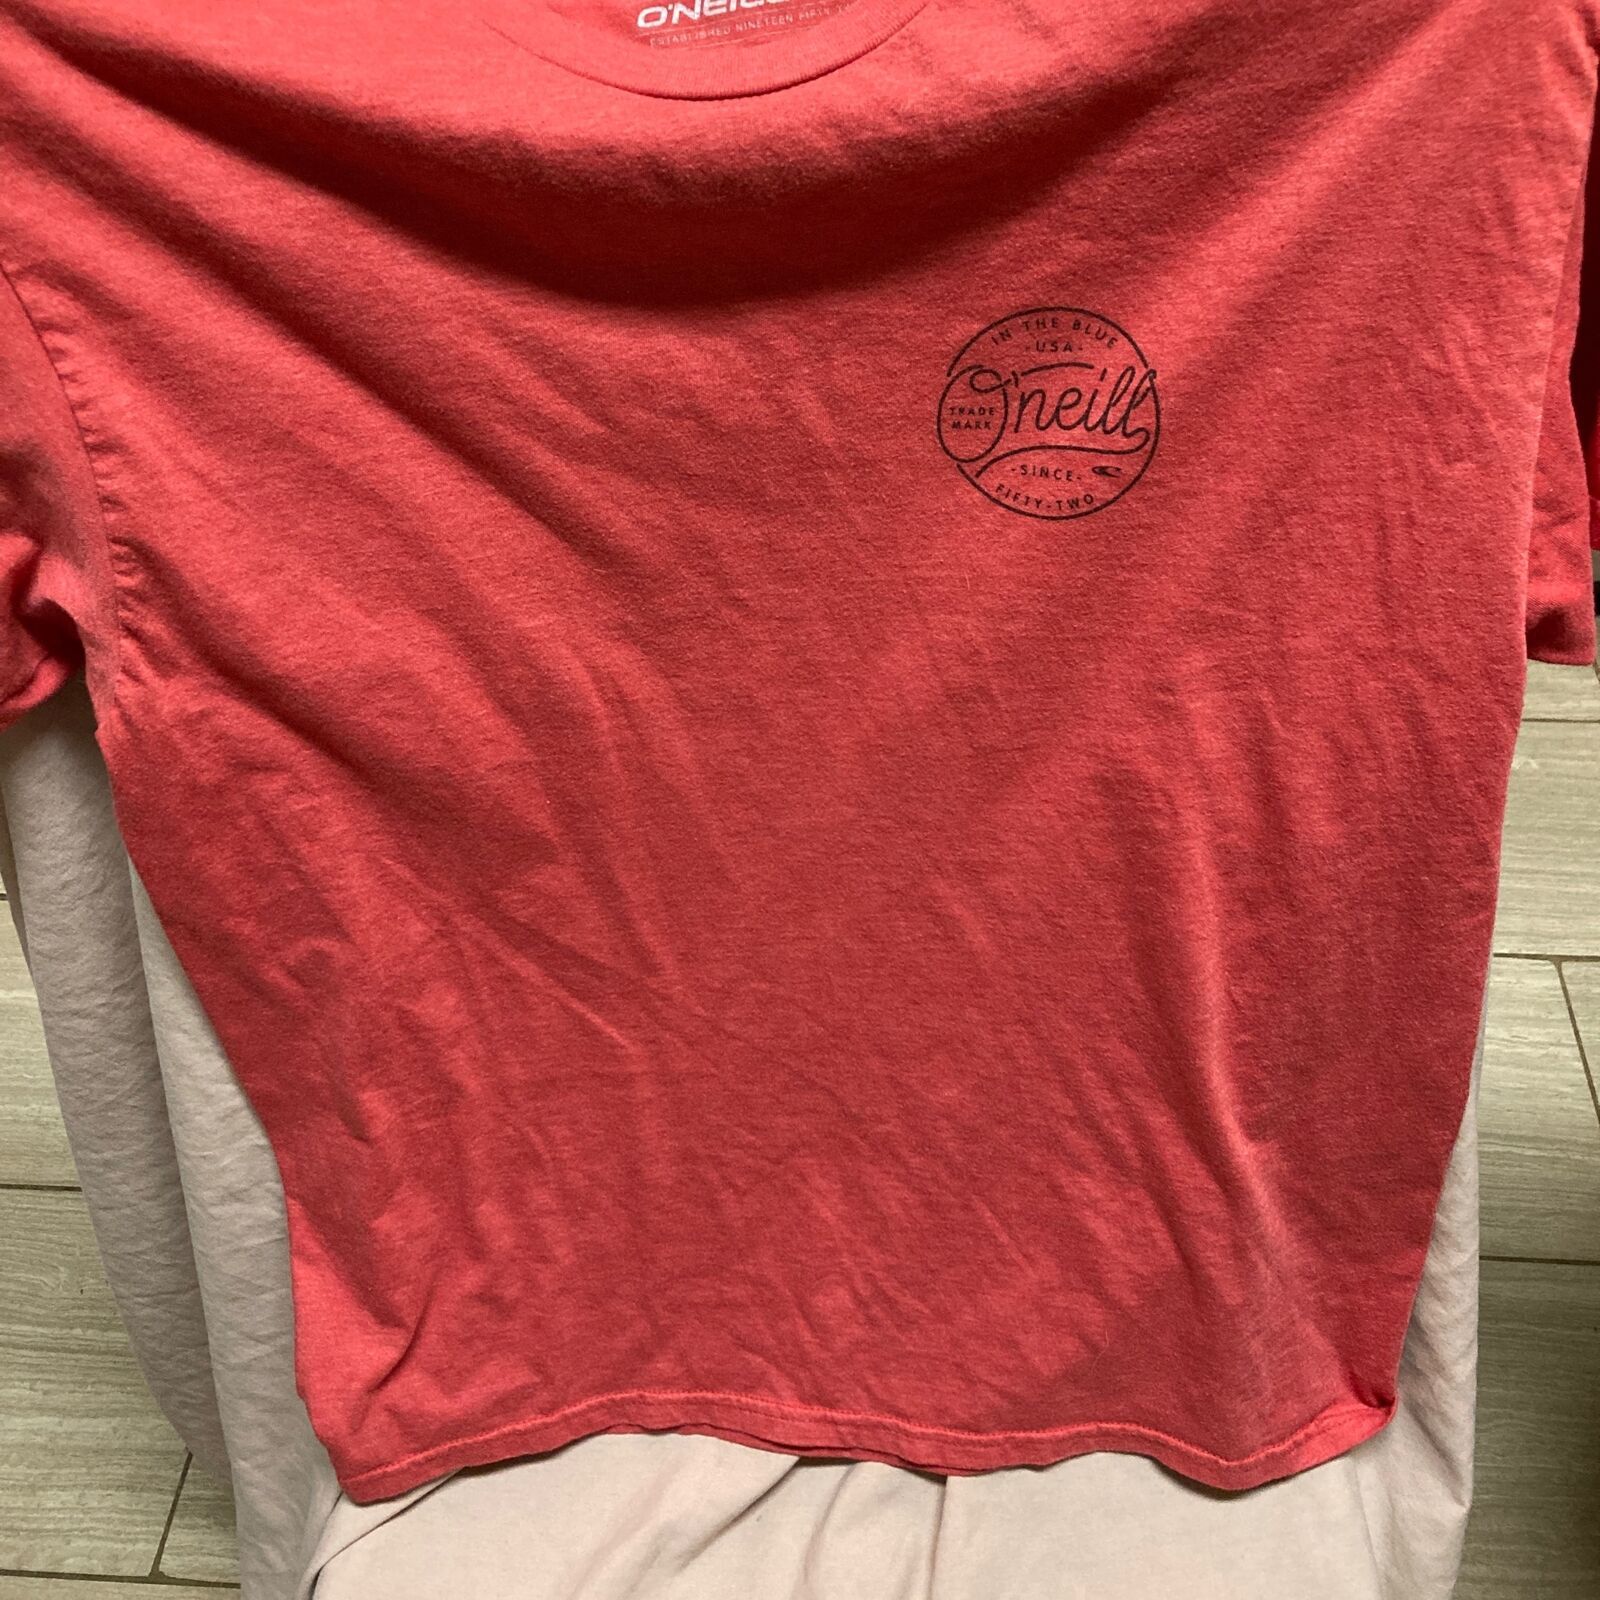 Primary image for O’Neill Red Graphic T-Shirt Size L